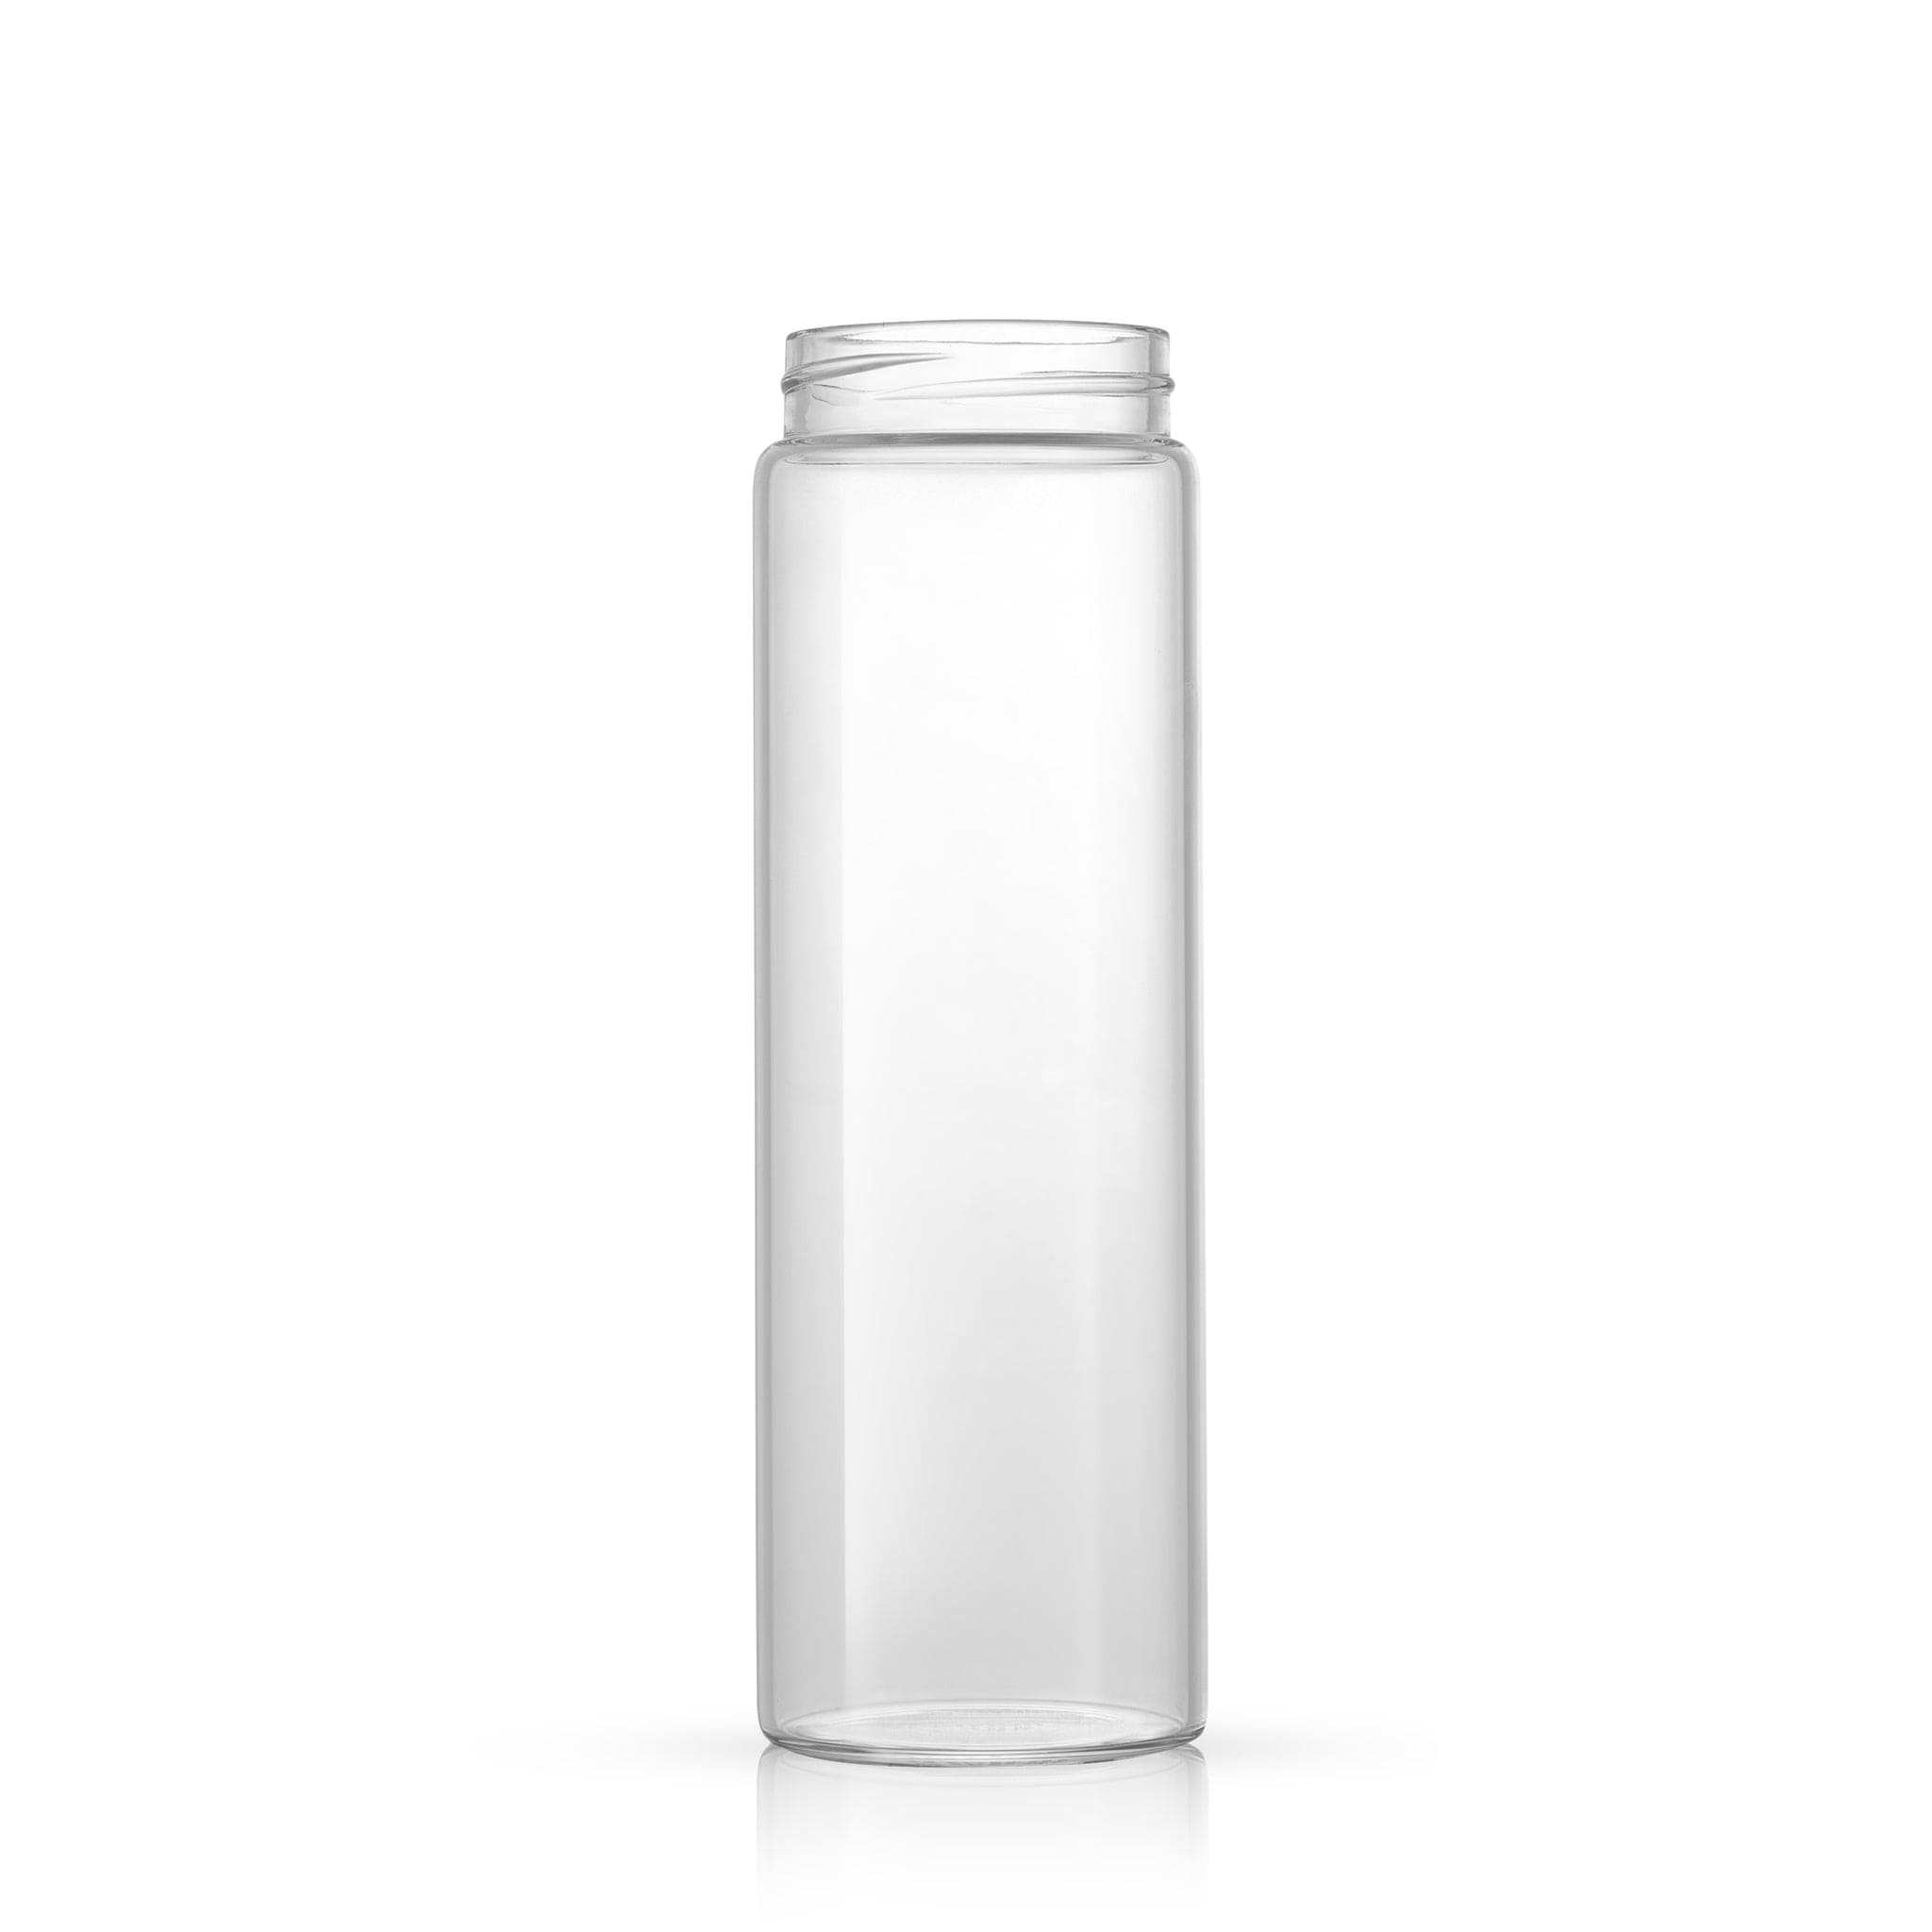 Joyjolt Glass Water Bottles With Stainless Steel Cap - 32 Oz Water